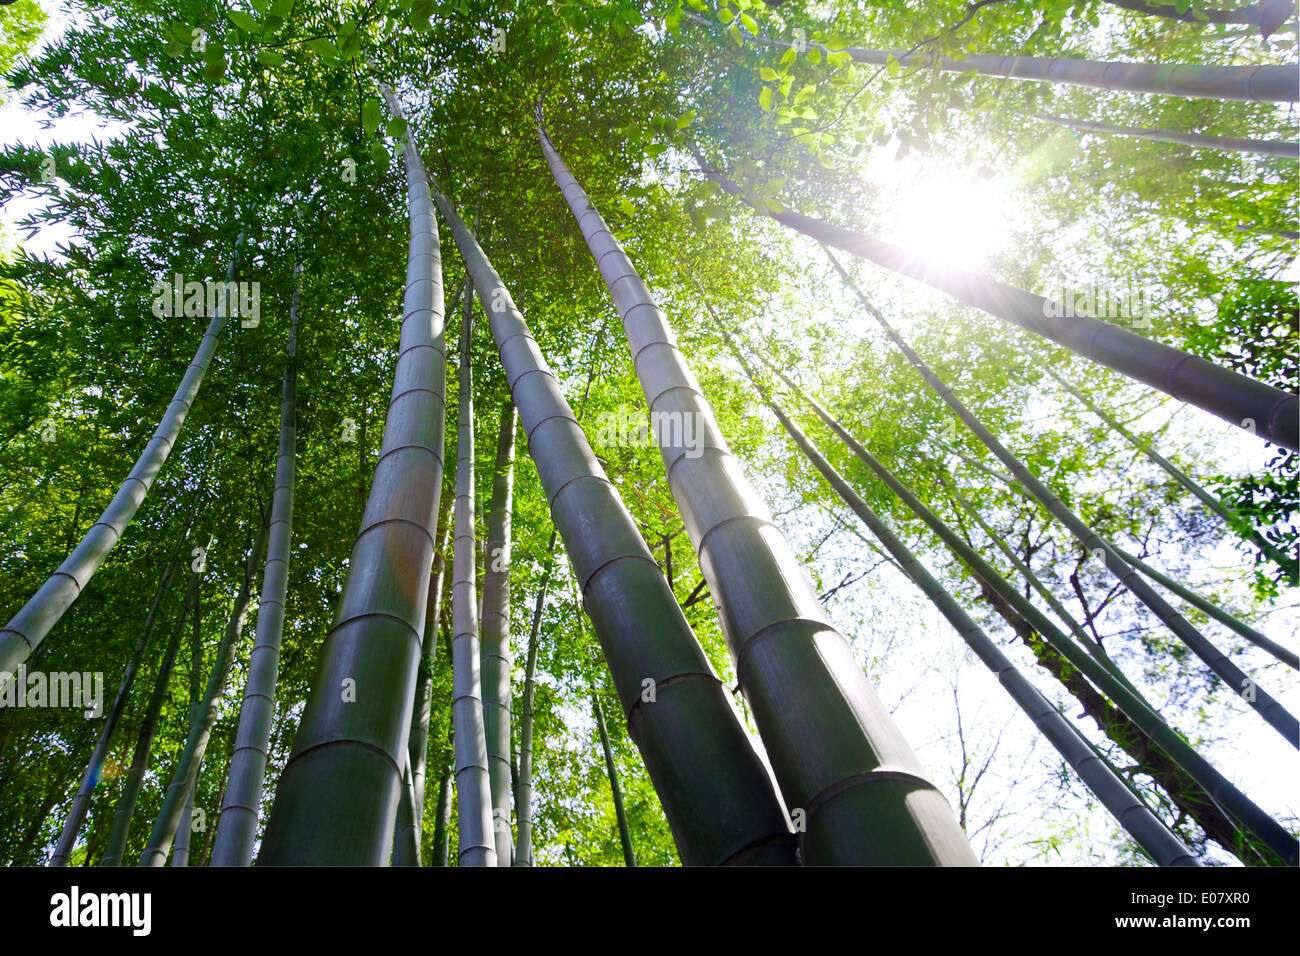 Tall Bamboo Trees in a bright and sunny forest Stock Photo